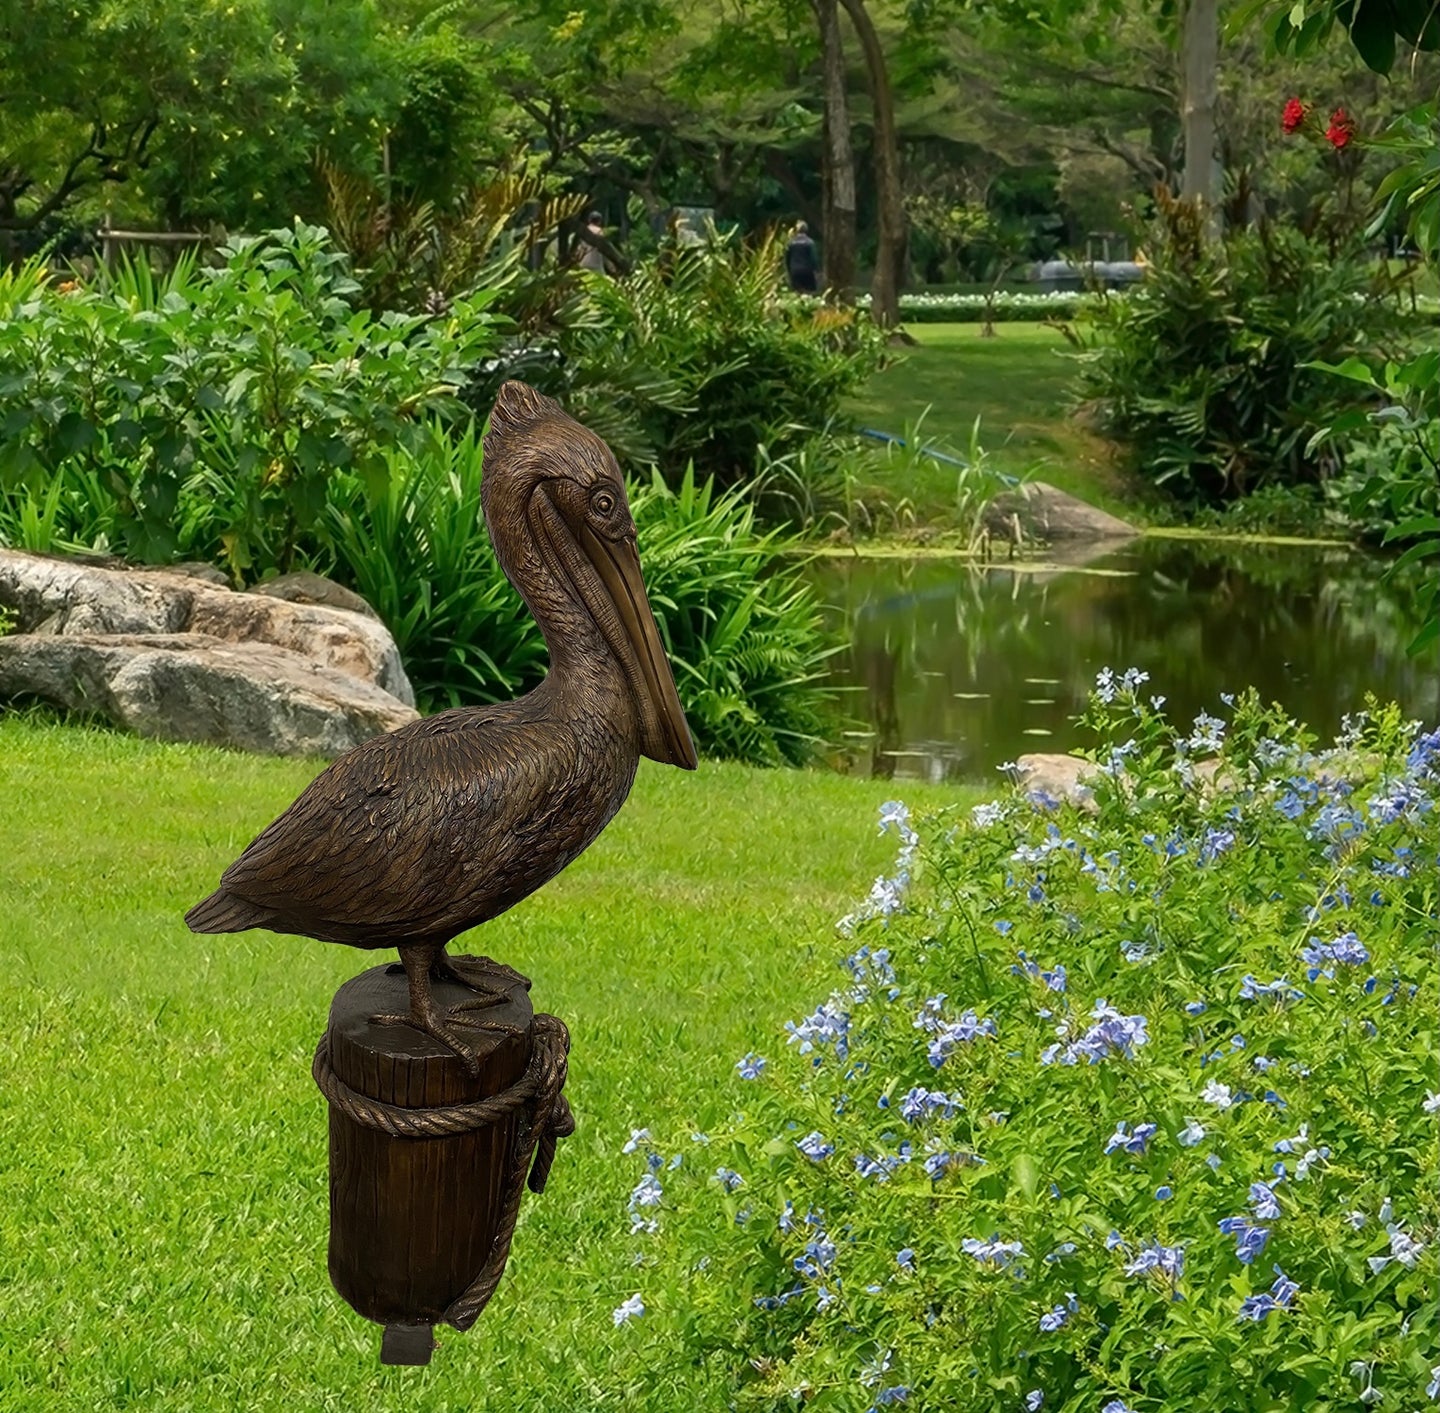 Pelican on Stump by Max Turner